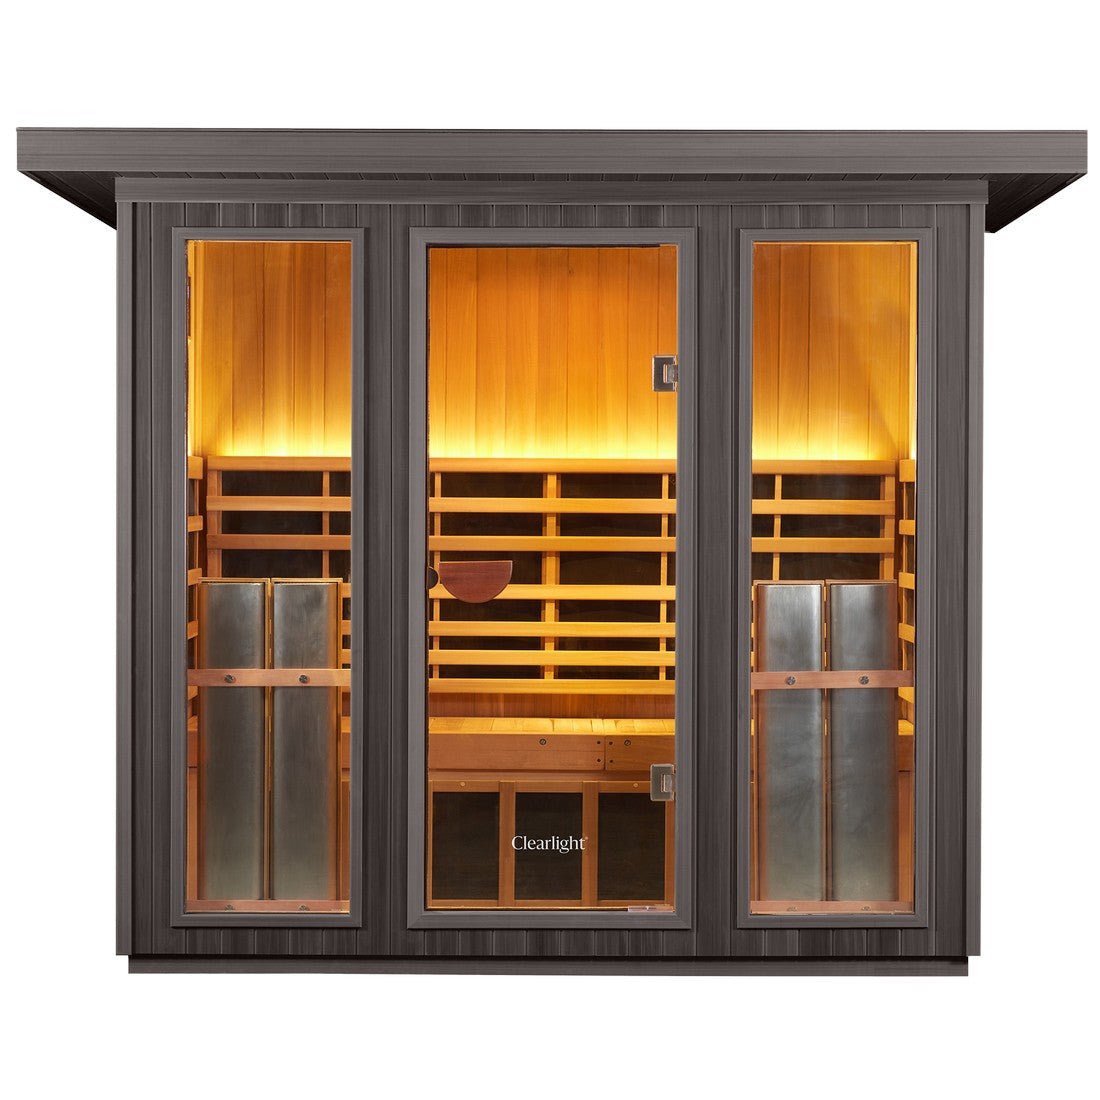 Clearlight Sanctuary™ Outdoor 5 Five Person Full Spectrum Infrared Sauna - Purely Relaxation